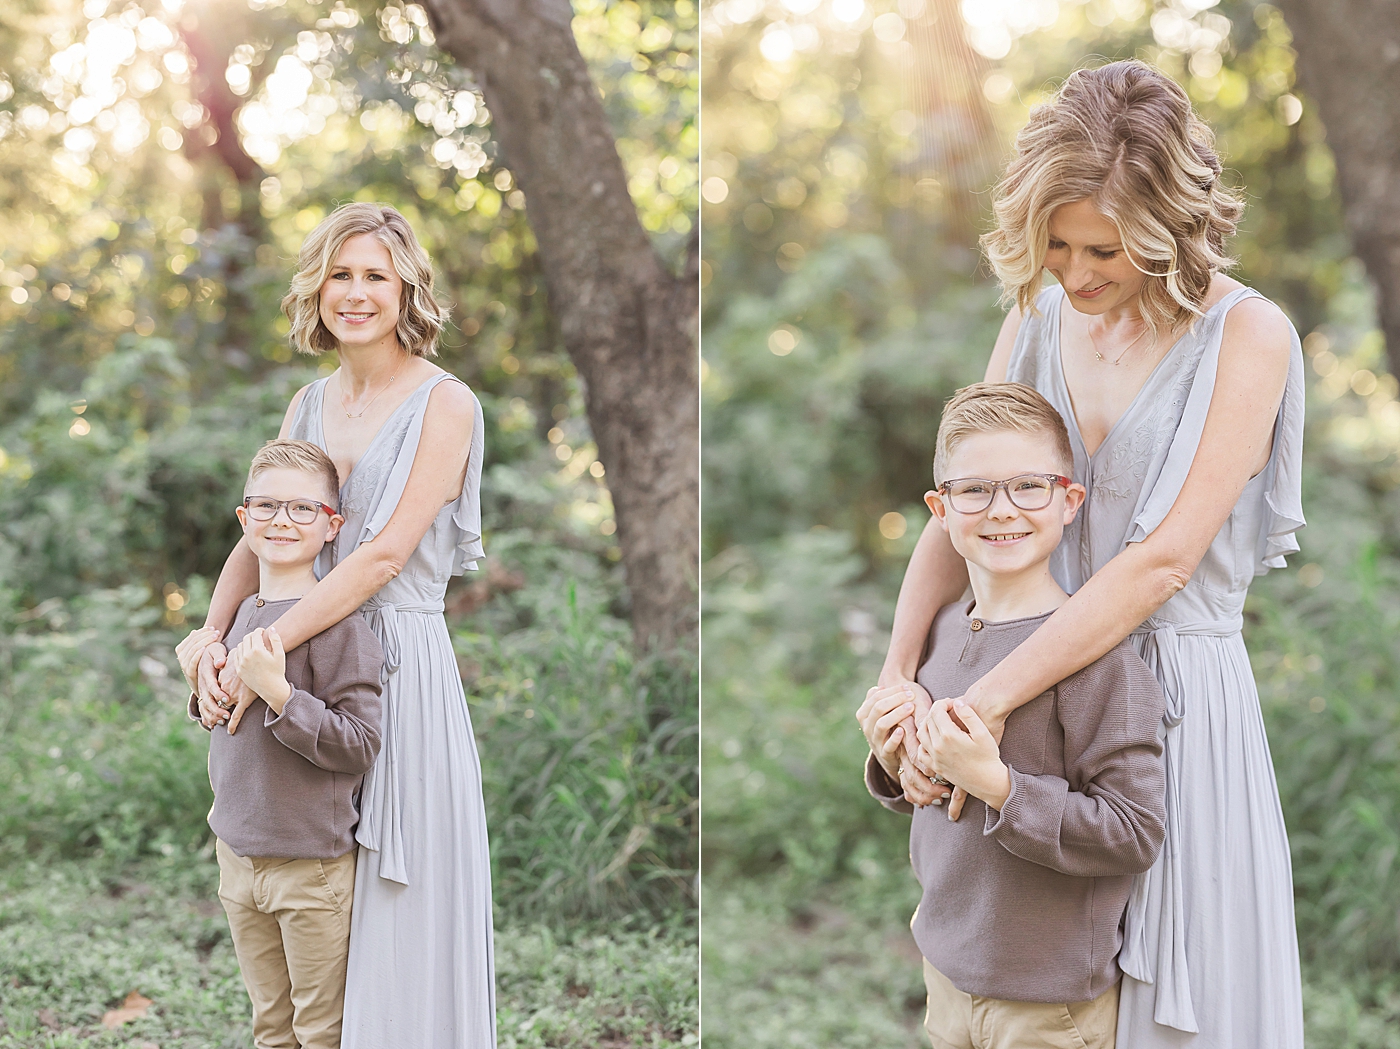 Mom standing with oldest son. Photo by Fresh Light Photography